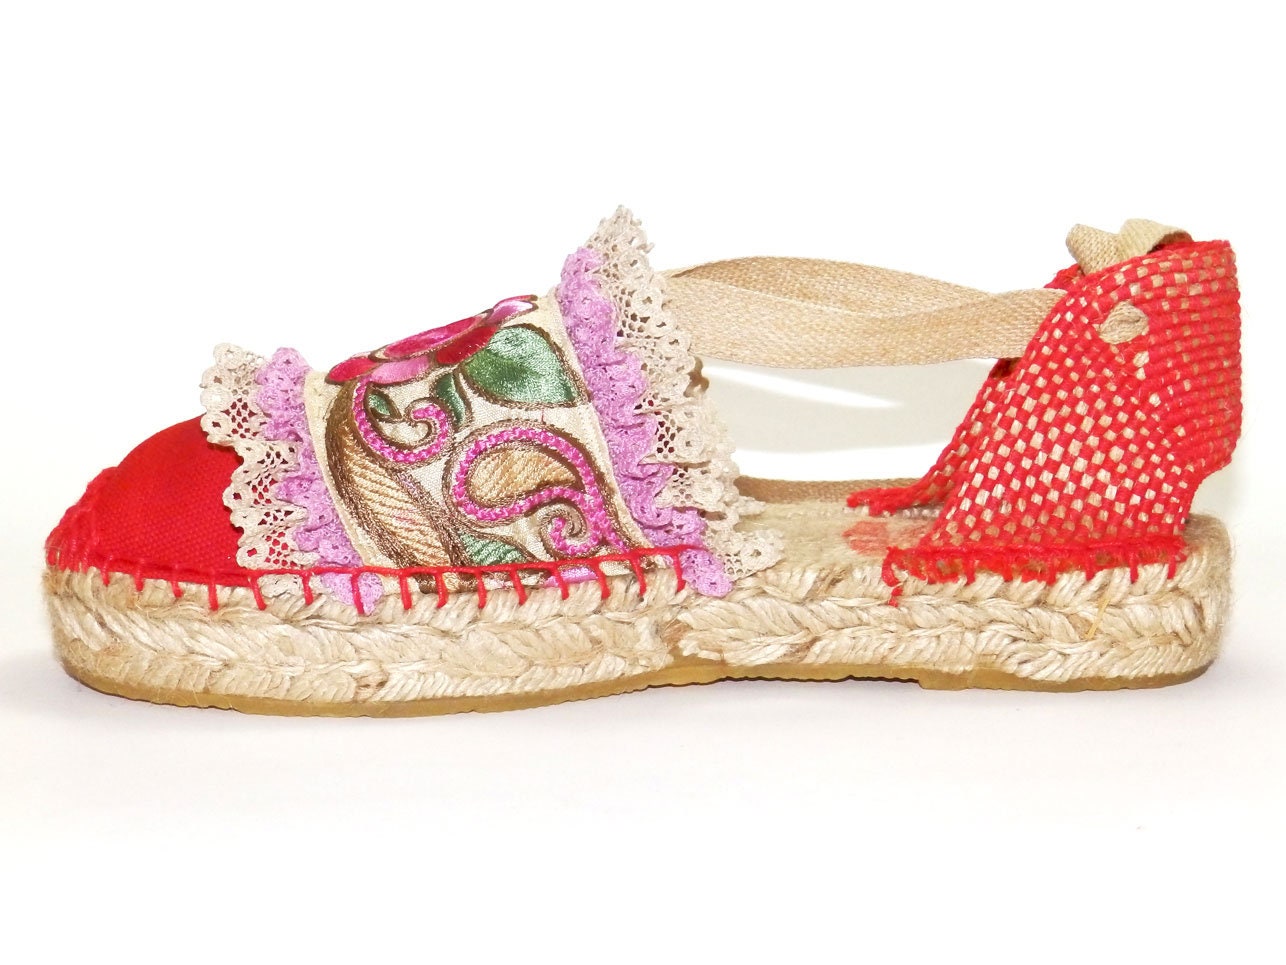 Platform red espadrilles with embroidered flowers and lace | Etsy